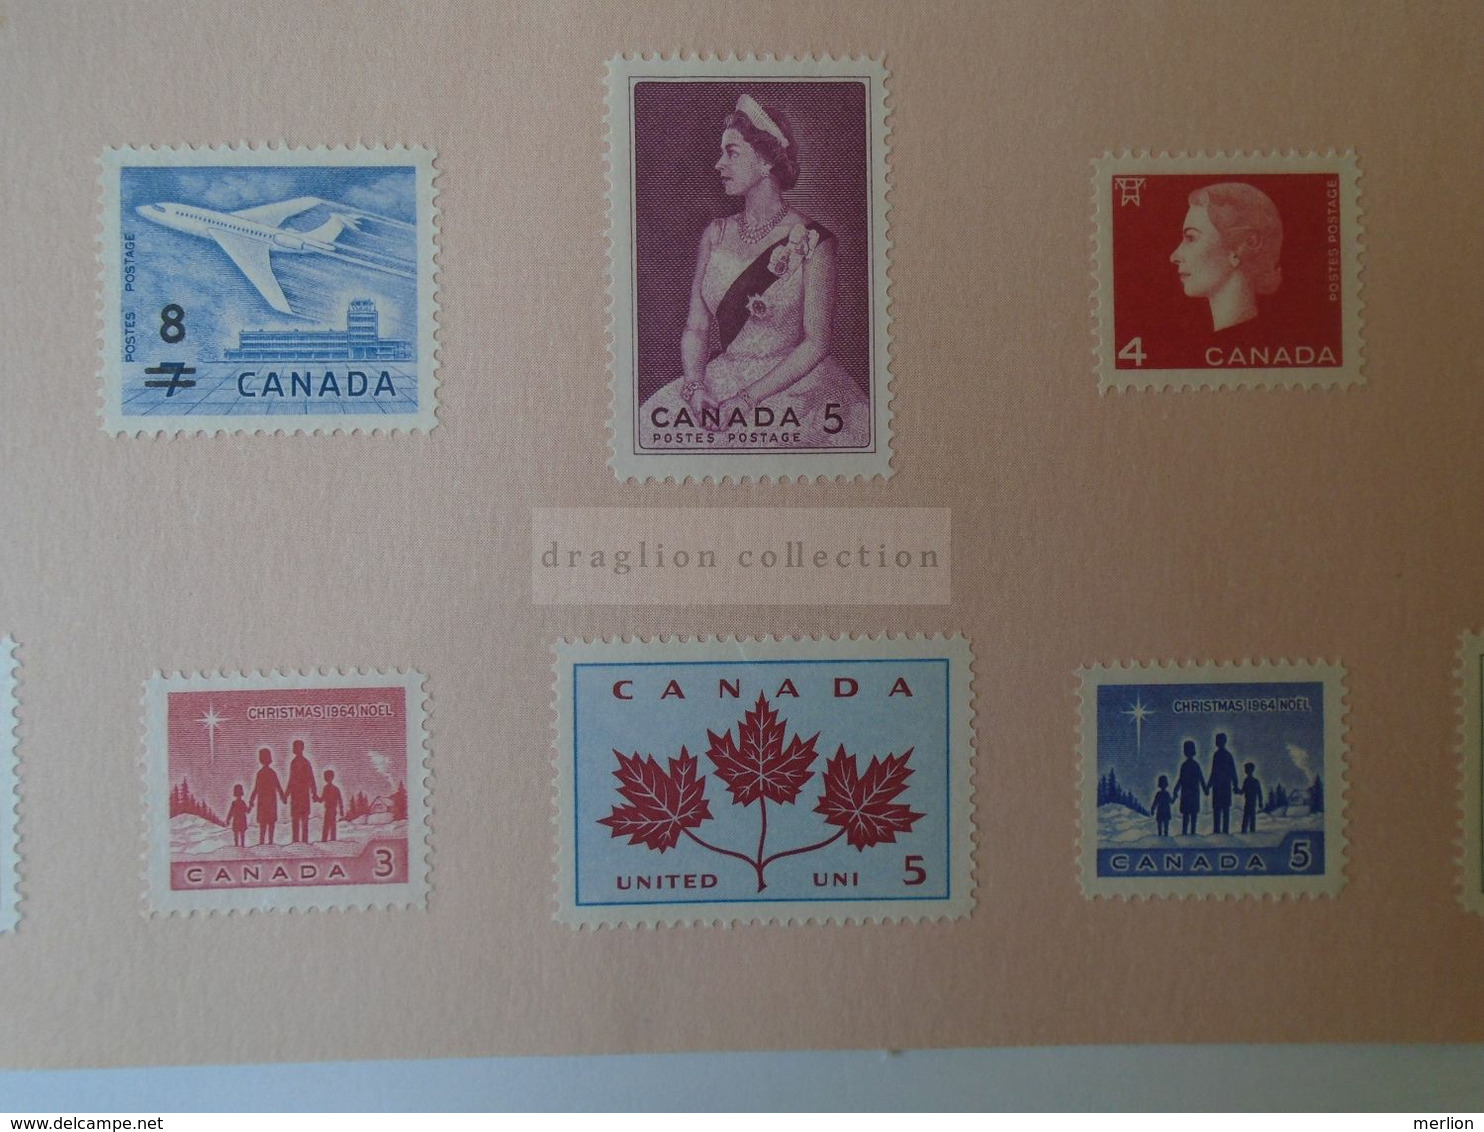 J1218   Canada 1964  Lot Of  2  Souvenir Cards  With Stamps Attached   1964/65 - Estuches Postales/ Merchandising